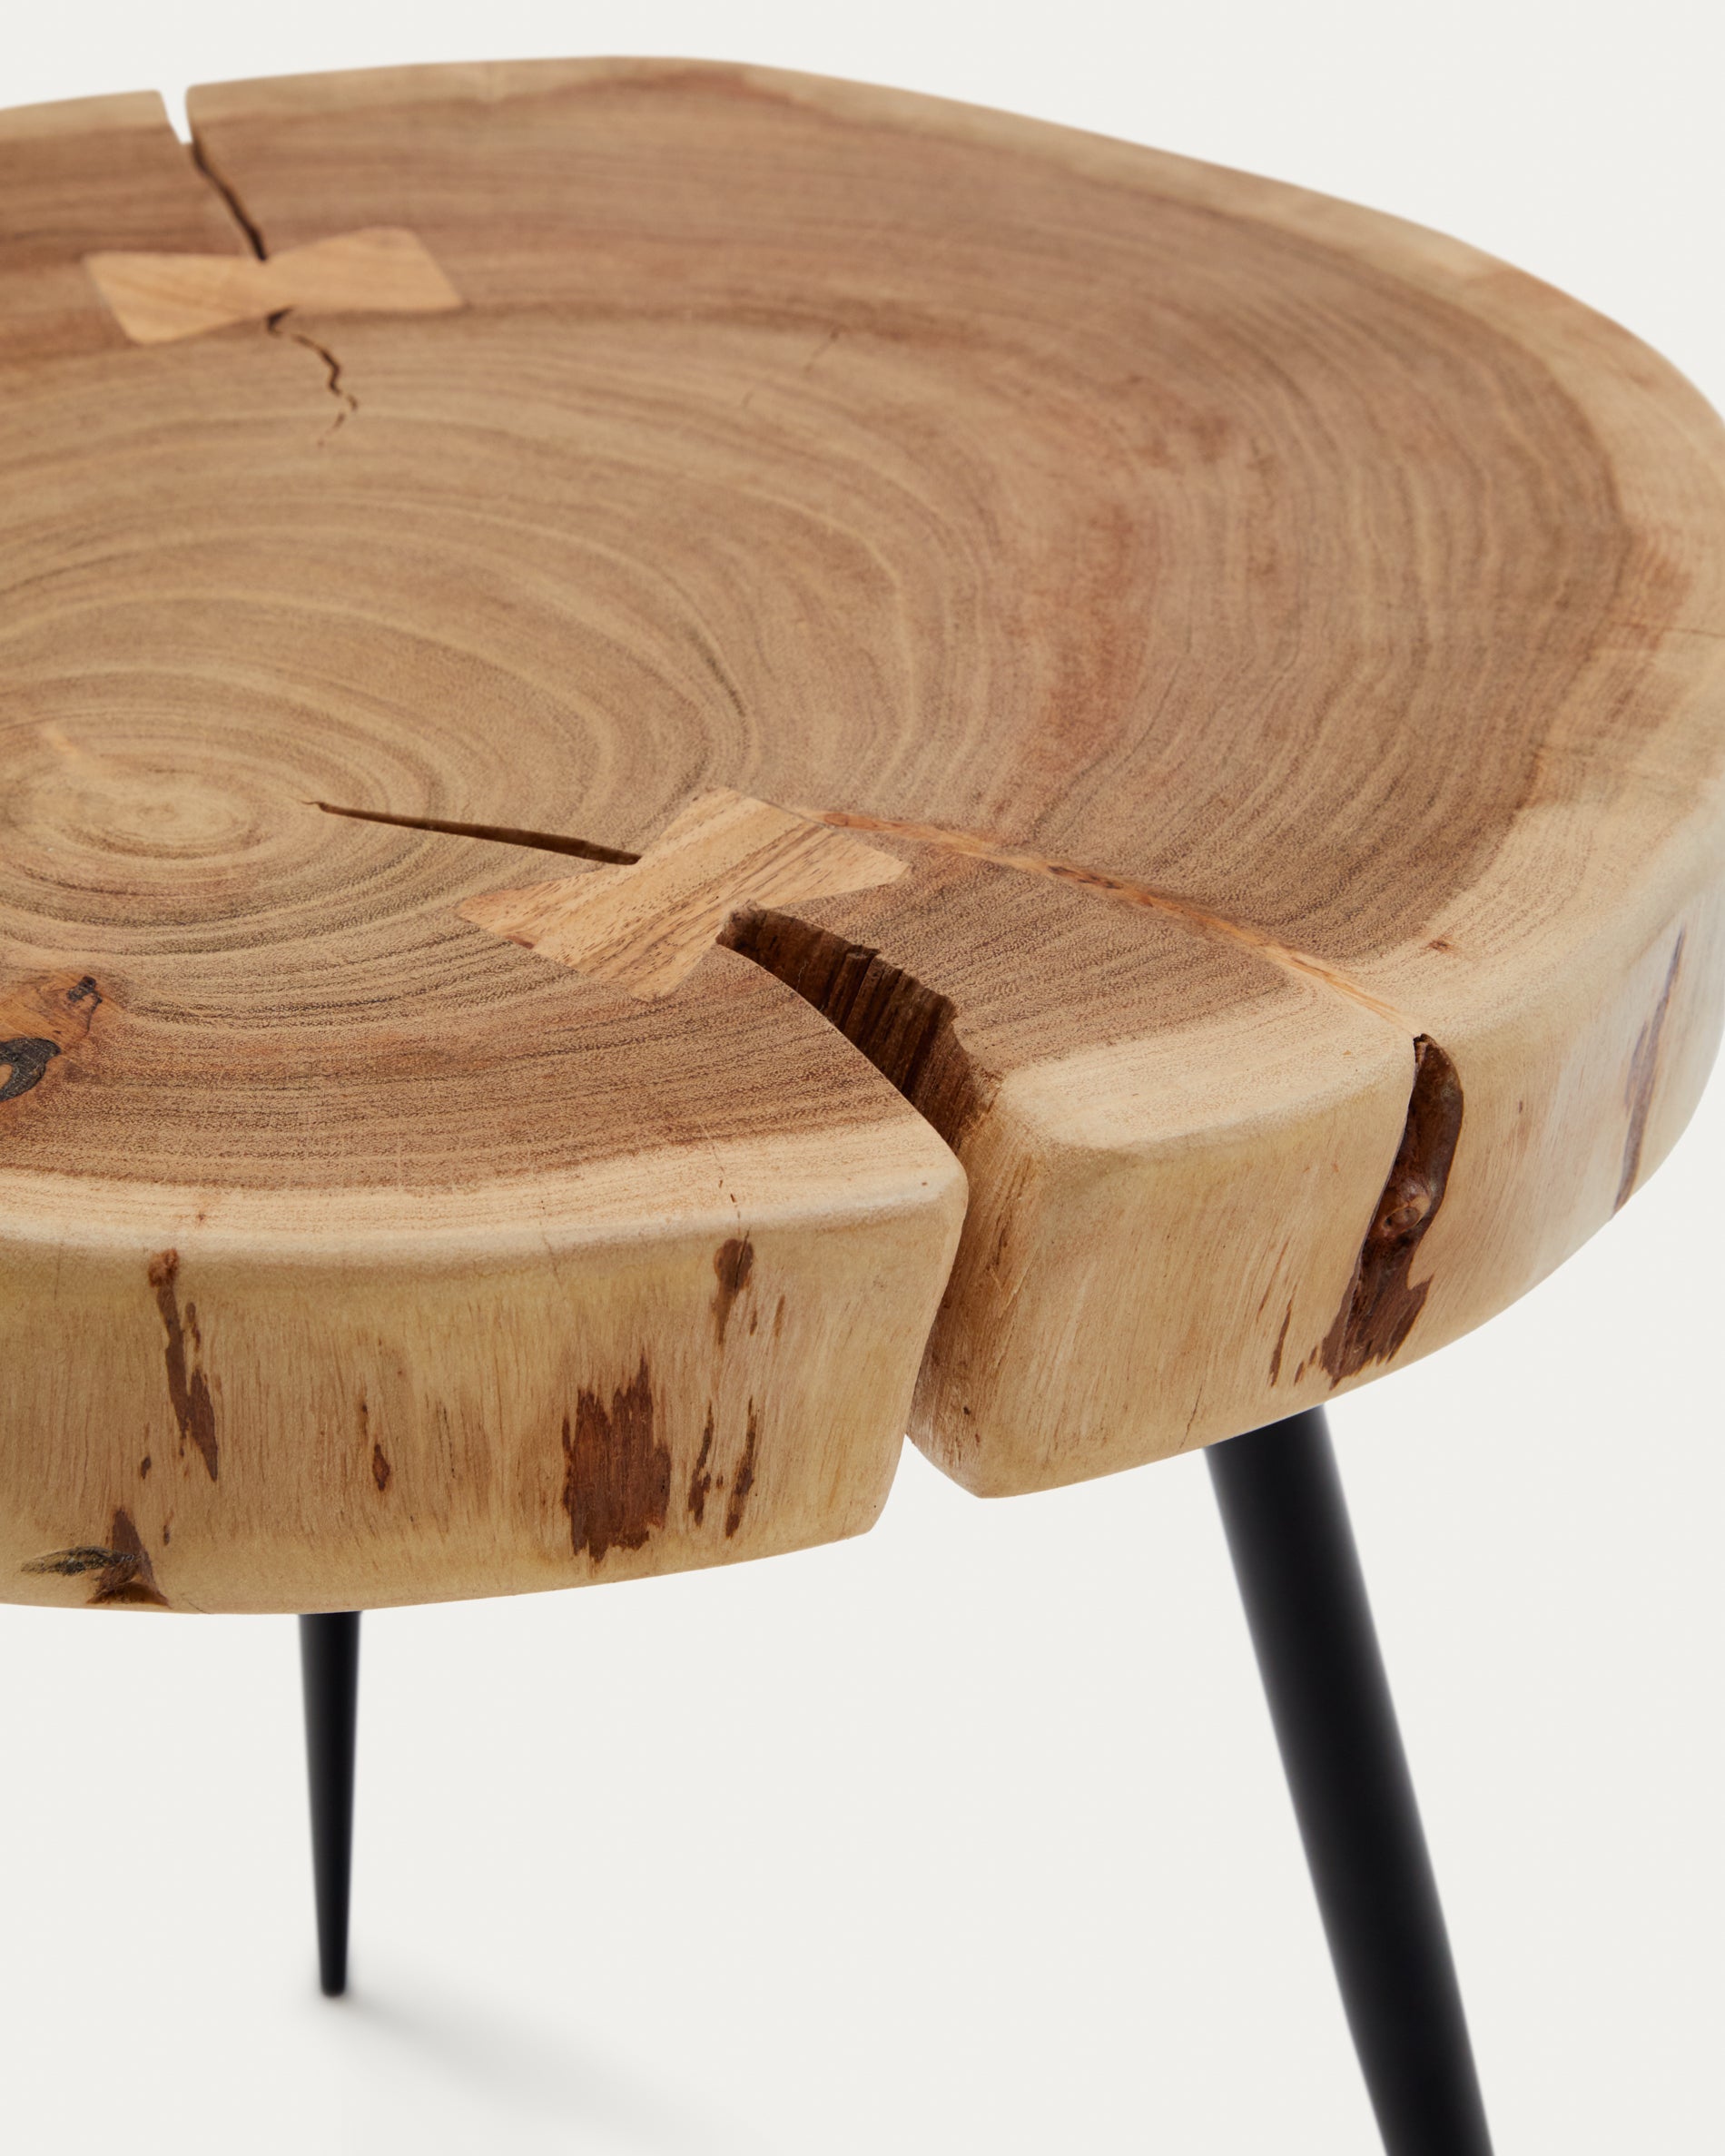 Eider side table made of solid acacia wood and steel Ø 40 x 40 cm